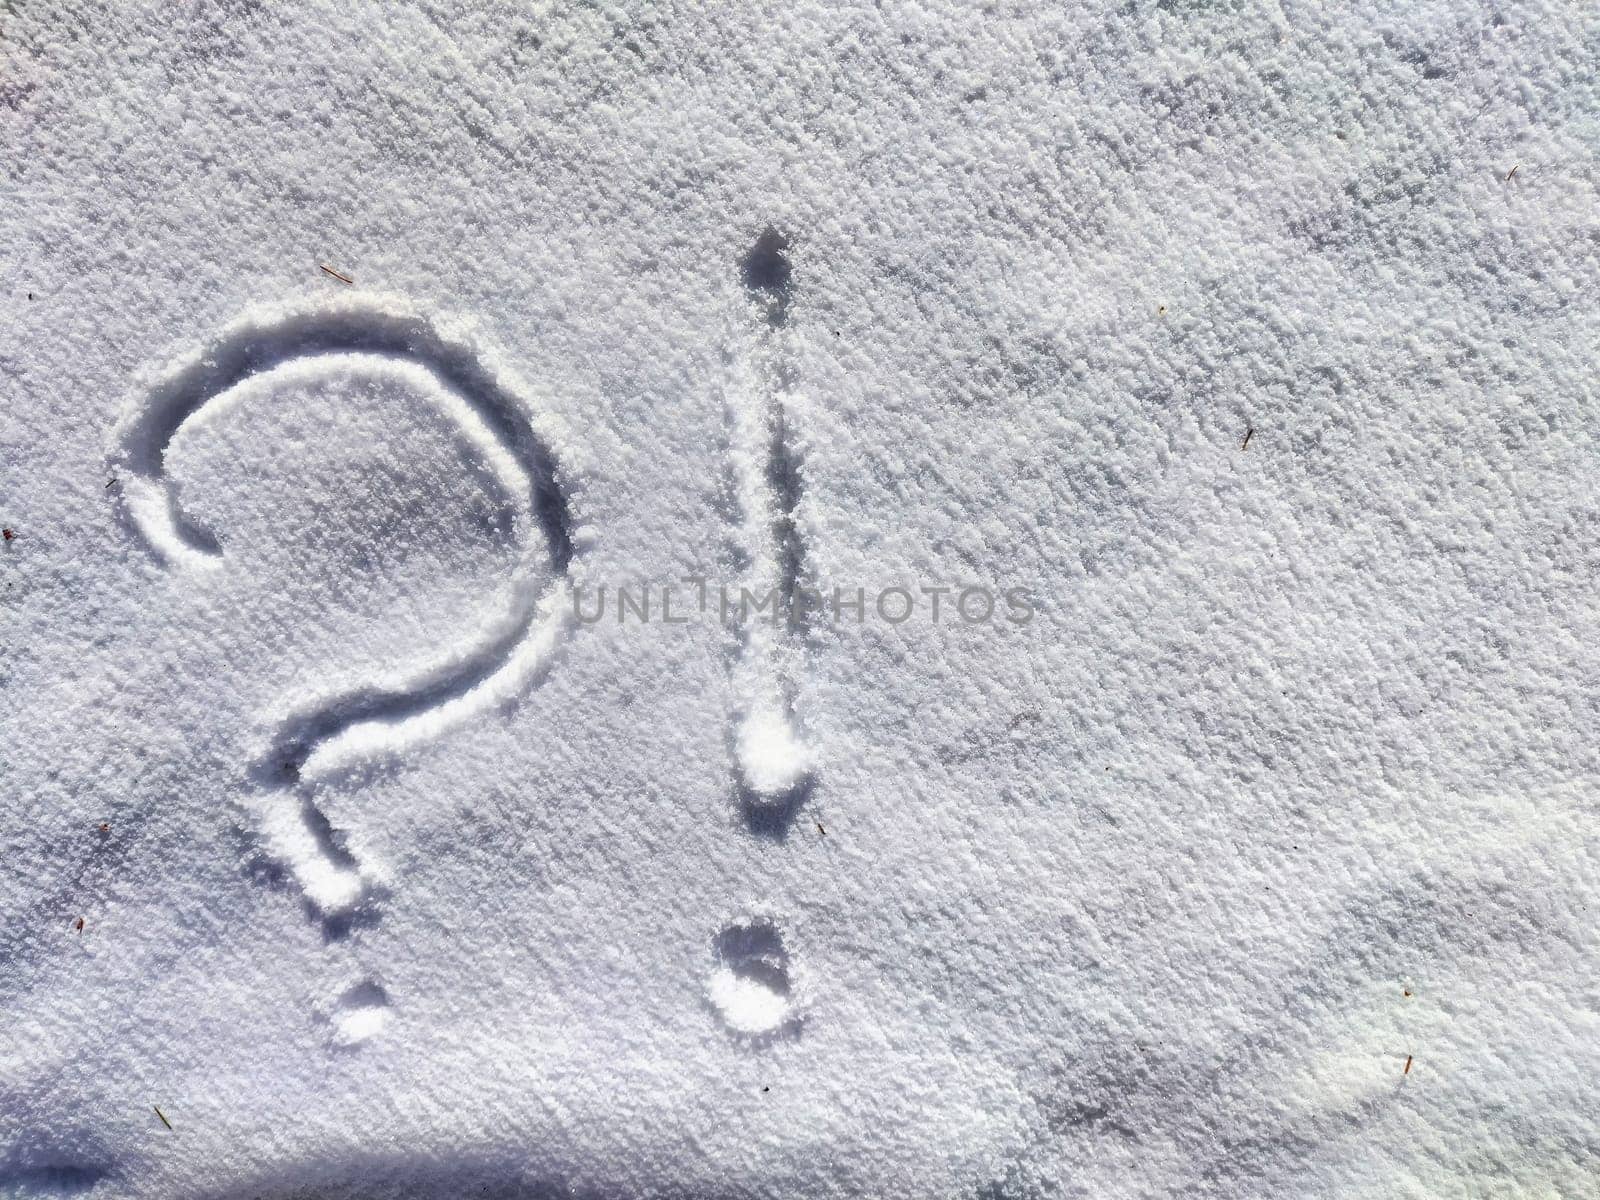 A large question mark is etched into the fresh snow, creating a stark contrast against the white surface on a serene winter morning.